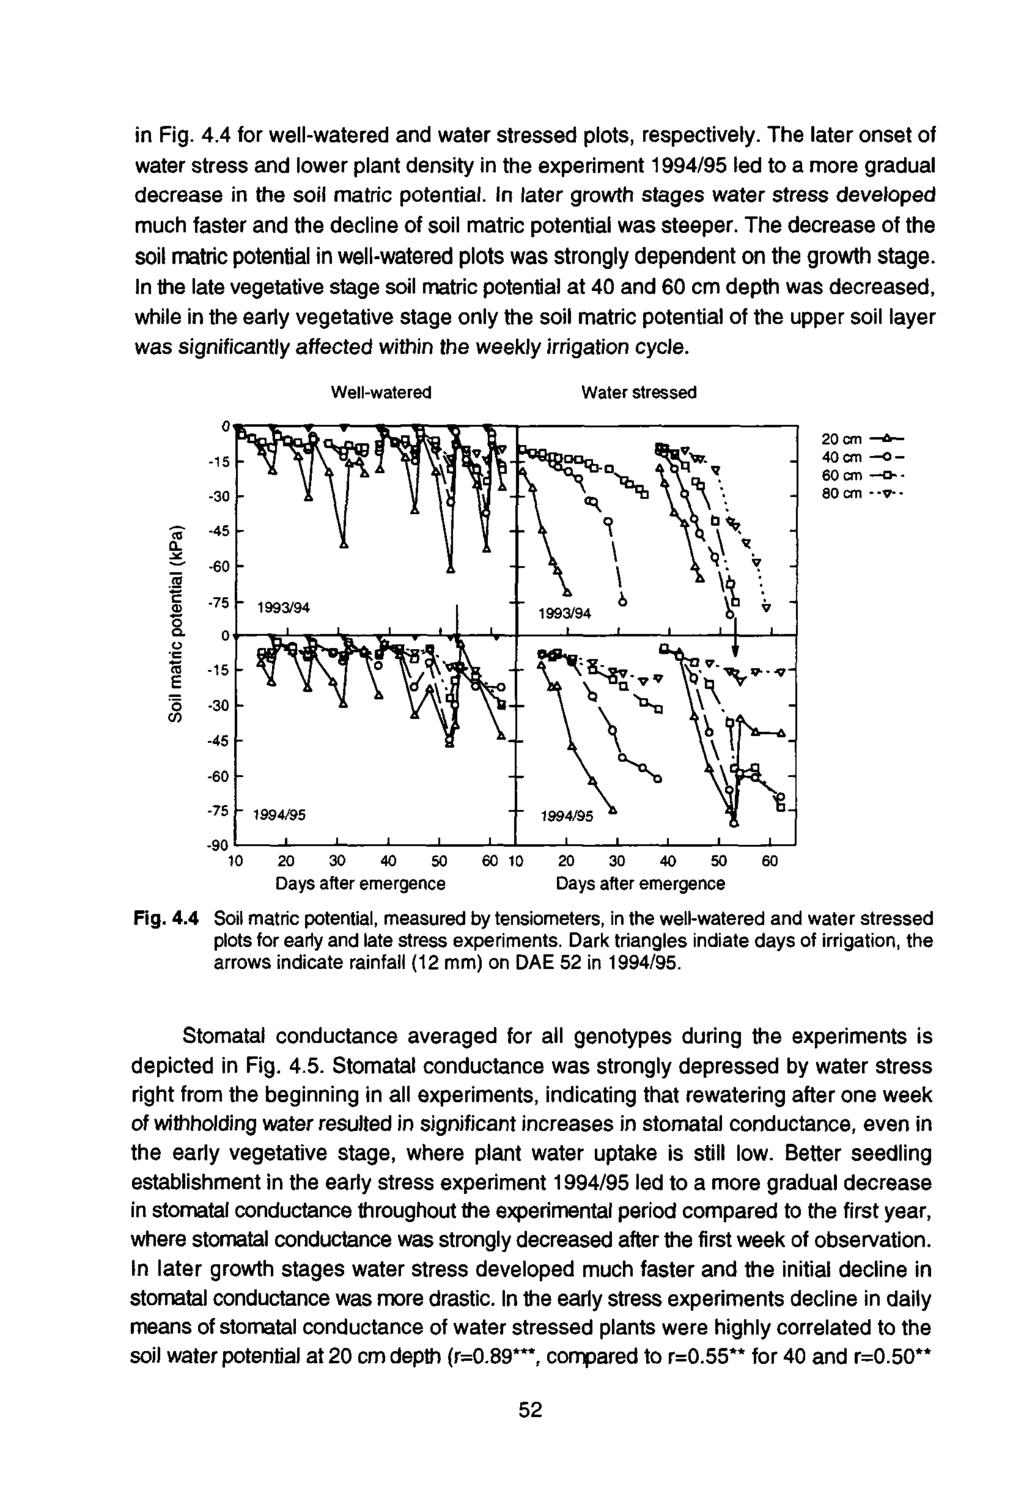 in Fig 4 4 for well-wtered nd wter stressed plots, respectively The lter onset of wter stress nd lower plnt density in the expenment 1994/95 led to more grdul decrese in the soil mtnc potentil In